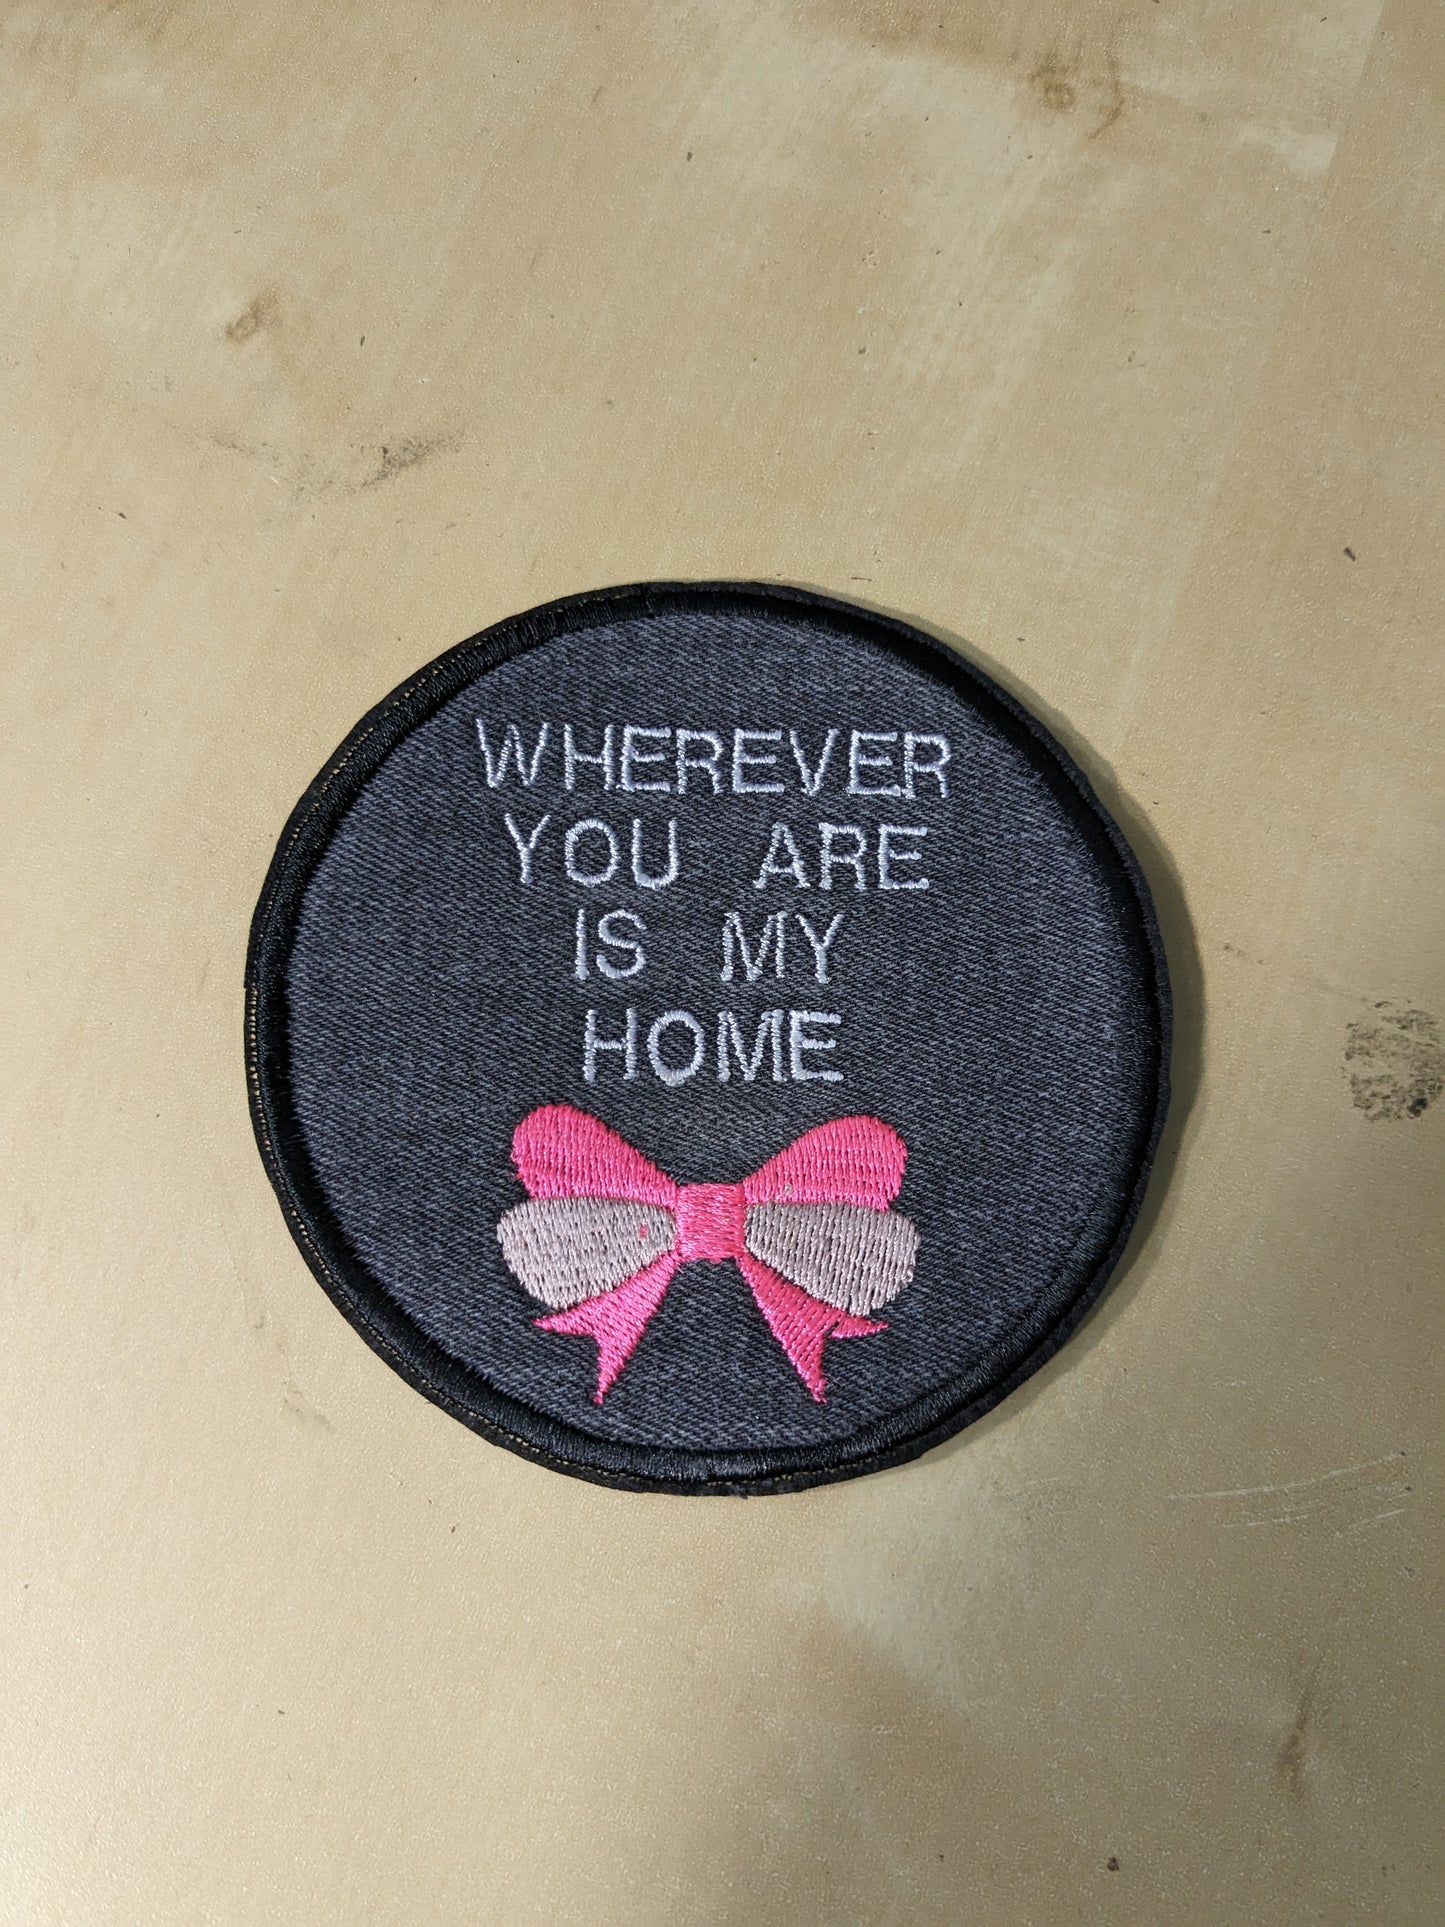 Jane Eyre Recycled Denim Sew On Patch -  Wherever You Are is my Home - Cute Bow Detail